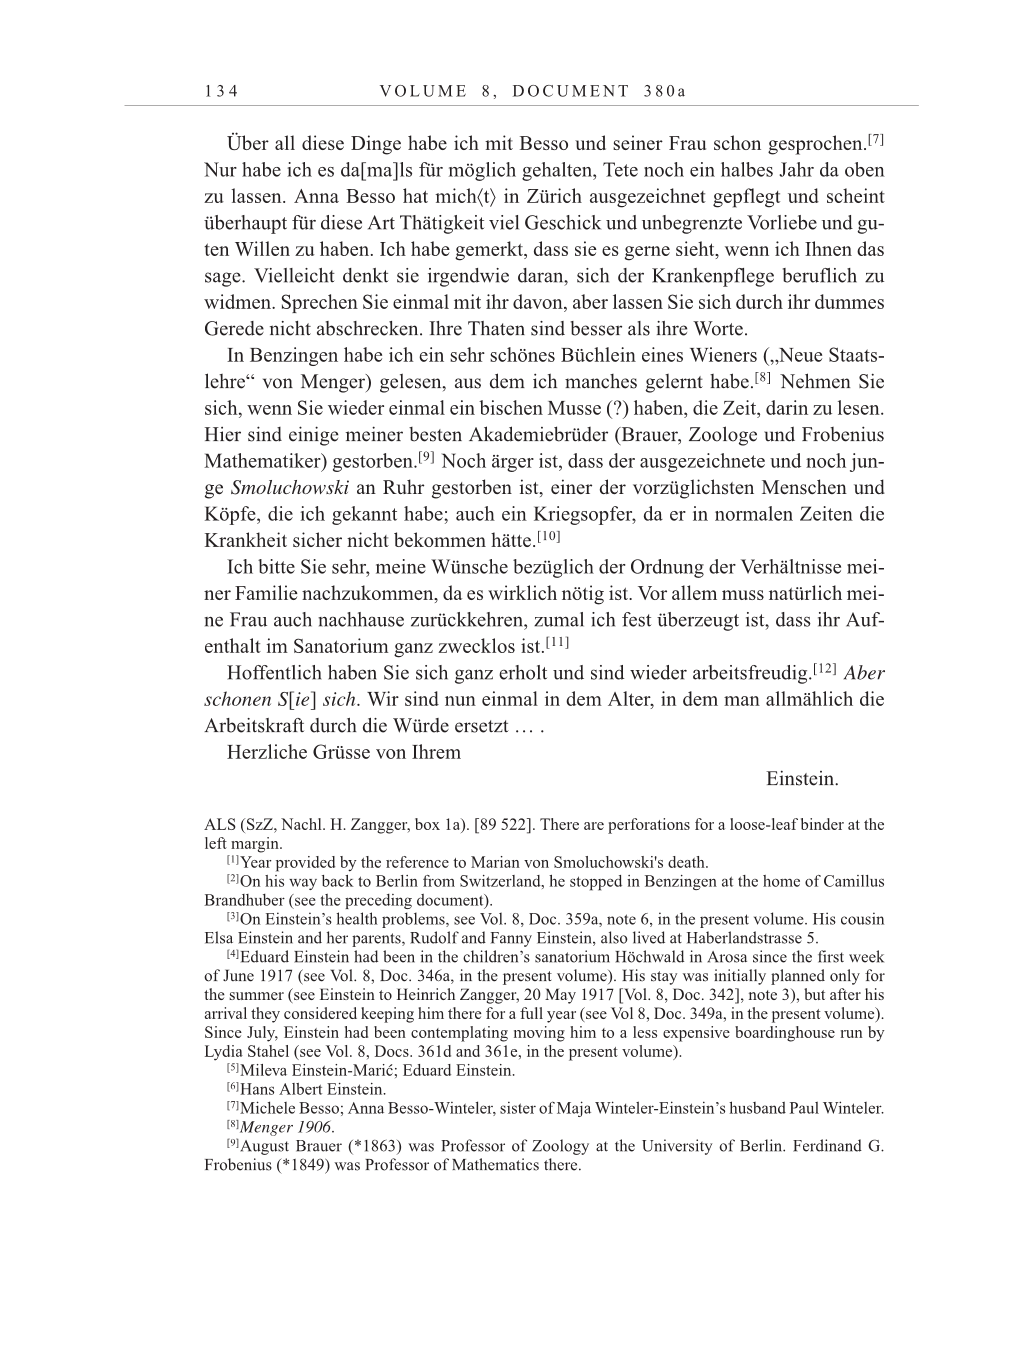 Volume 10: The Berlin Years: Correspondence May-December 1920 / Supplementary Correspondence 1909-1920 page 134